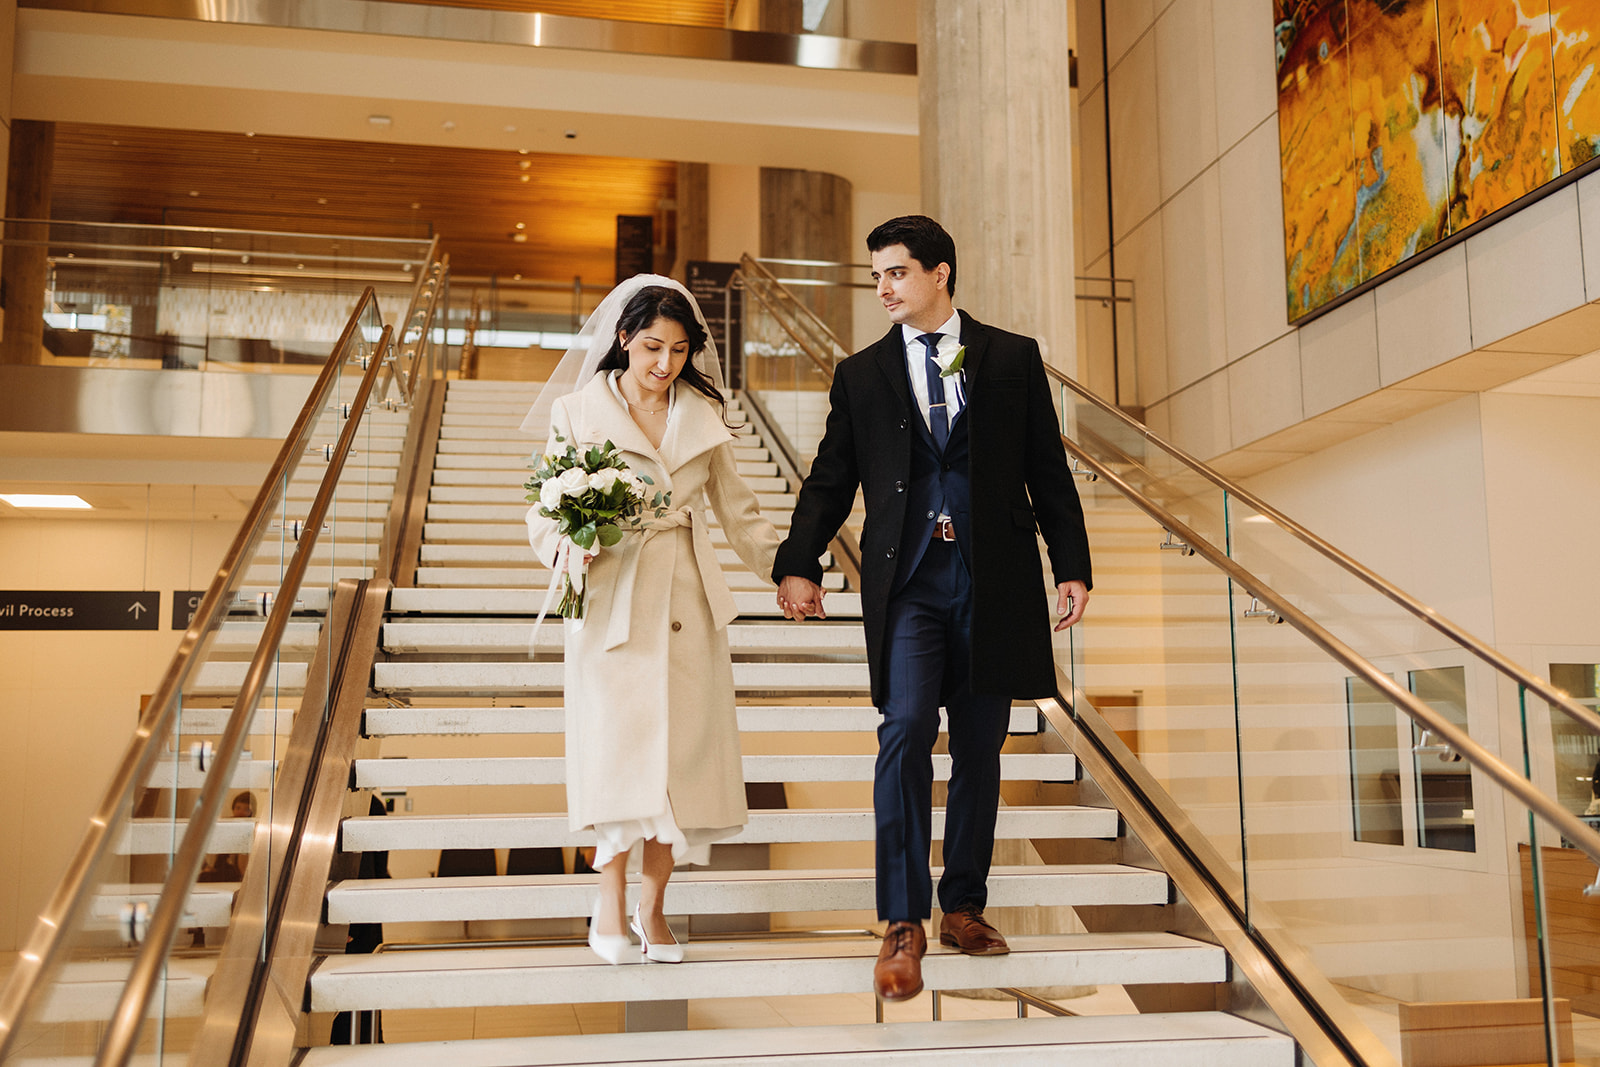 Bride and groom walking down the staircase at the new multnomah county courthouse in portland oregon